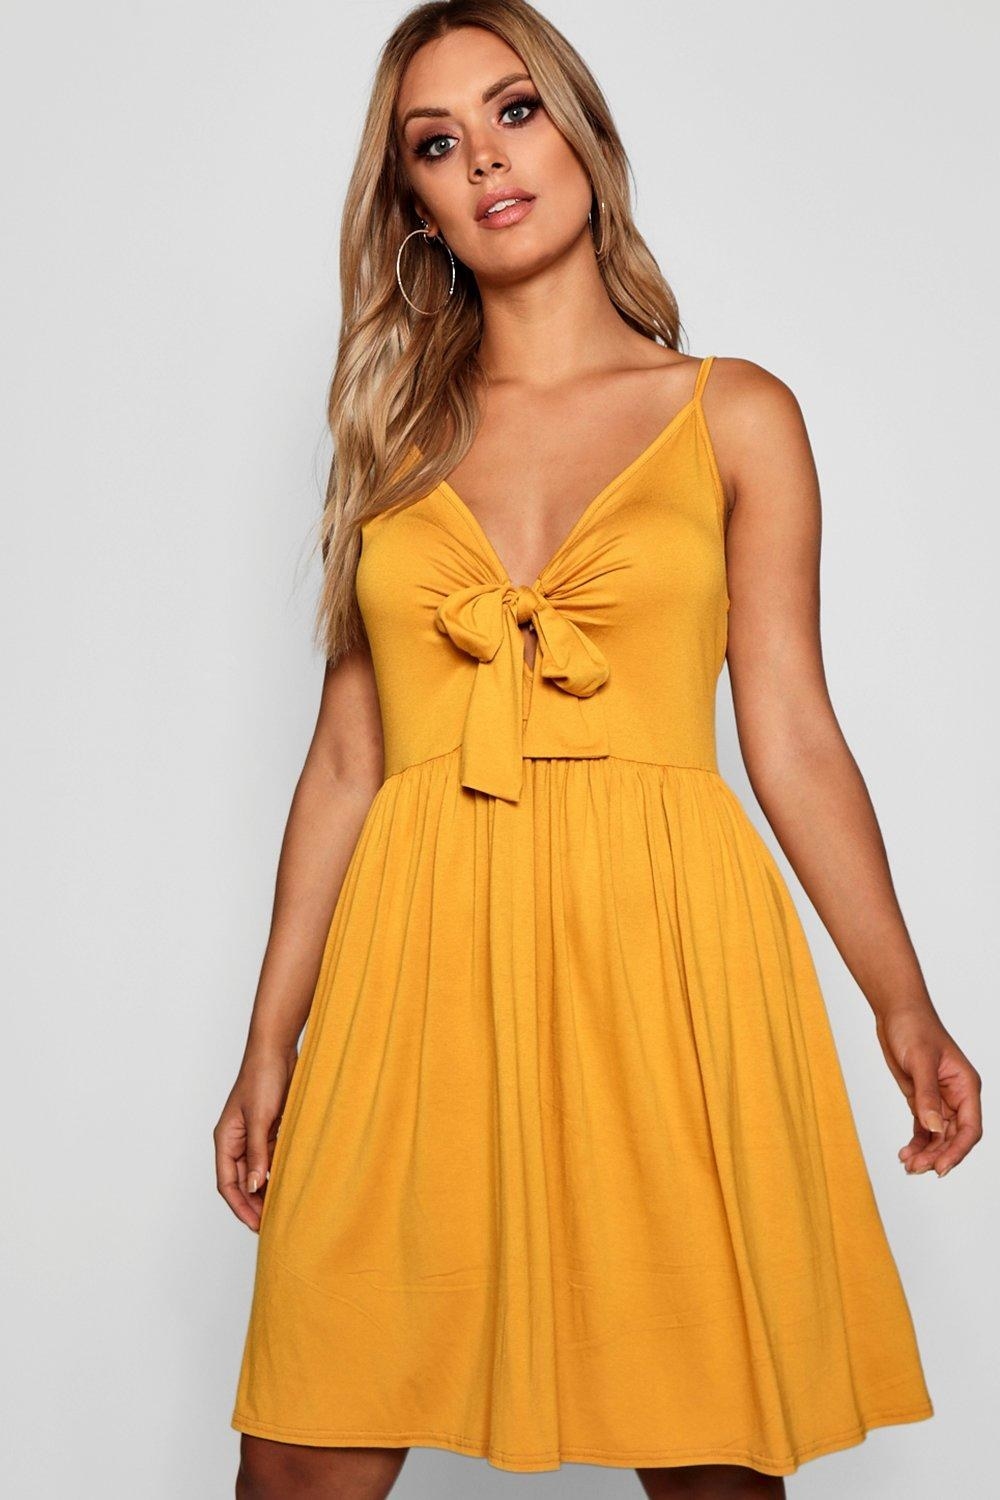 model wears yellow dress with bow front 